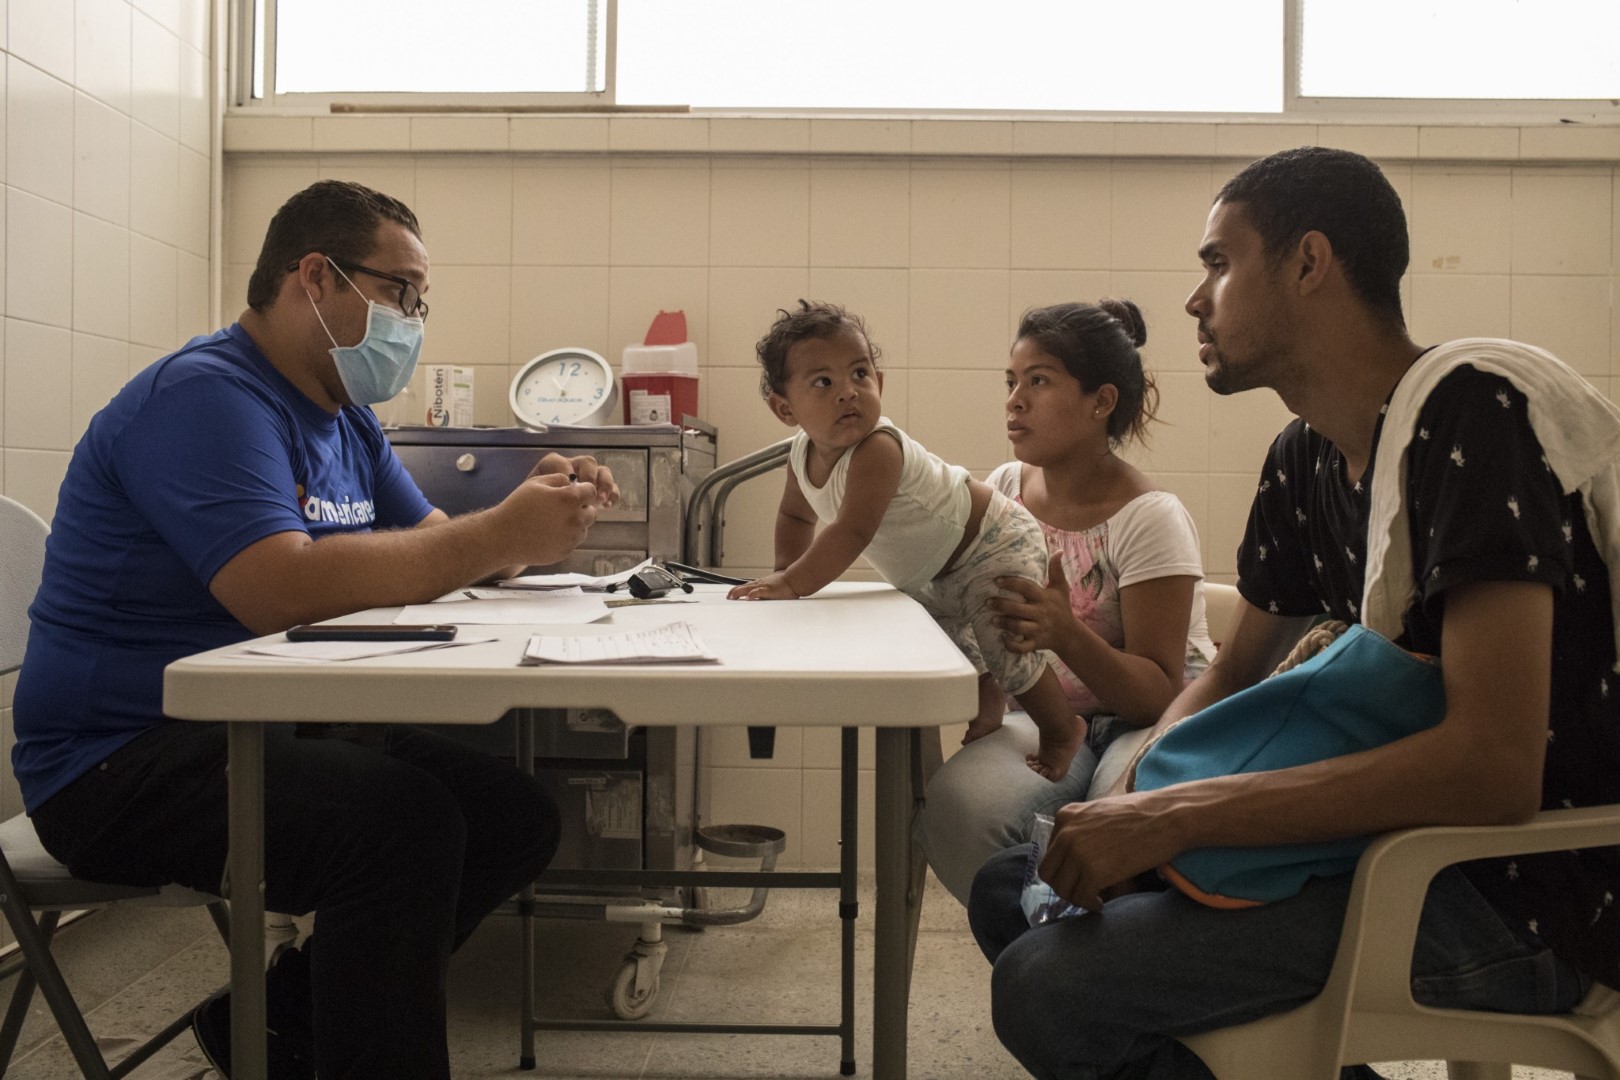 A Venezuelan family seeks care at an Americares primary care center in Colombia. Photo by Nicolo Filippo Rosso.